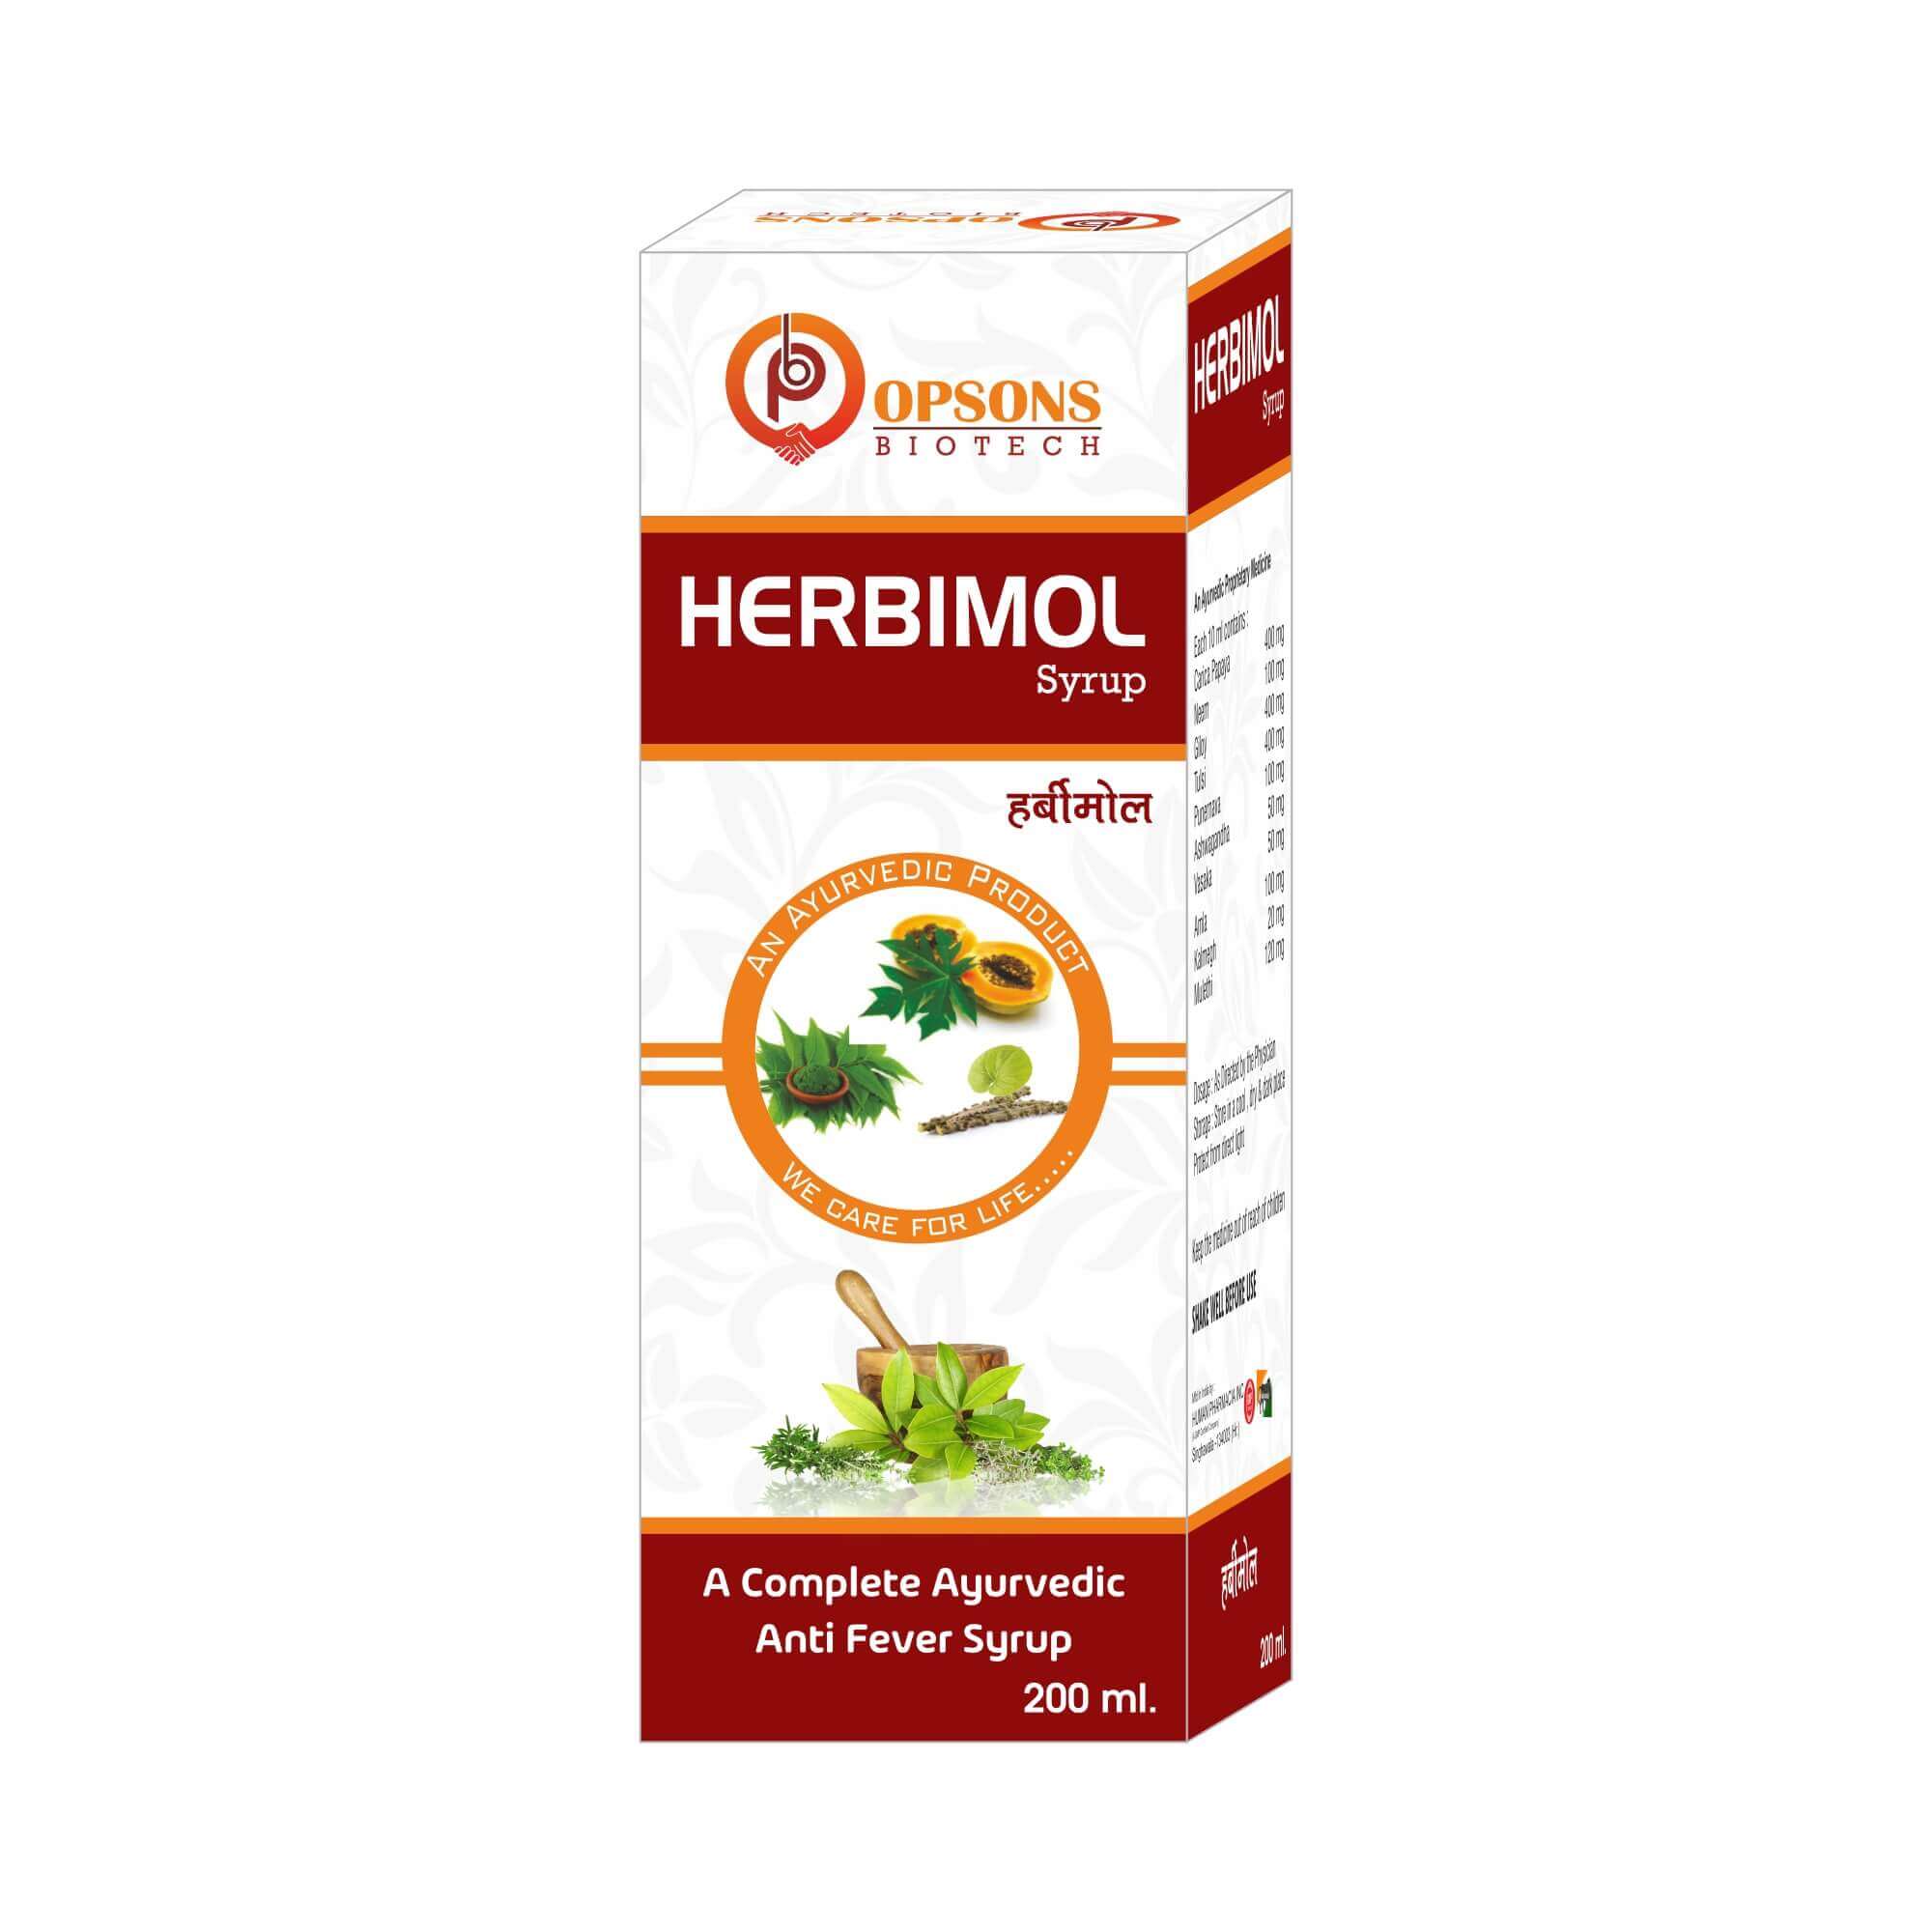 Product Name: Herbimol, Compositions of Herbimol are Complete Ayurvedic Anti Fever Syrup  - Opsons Biotech